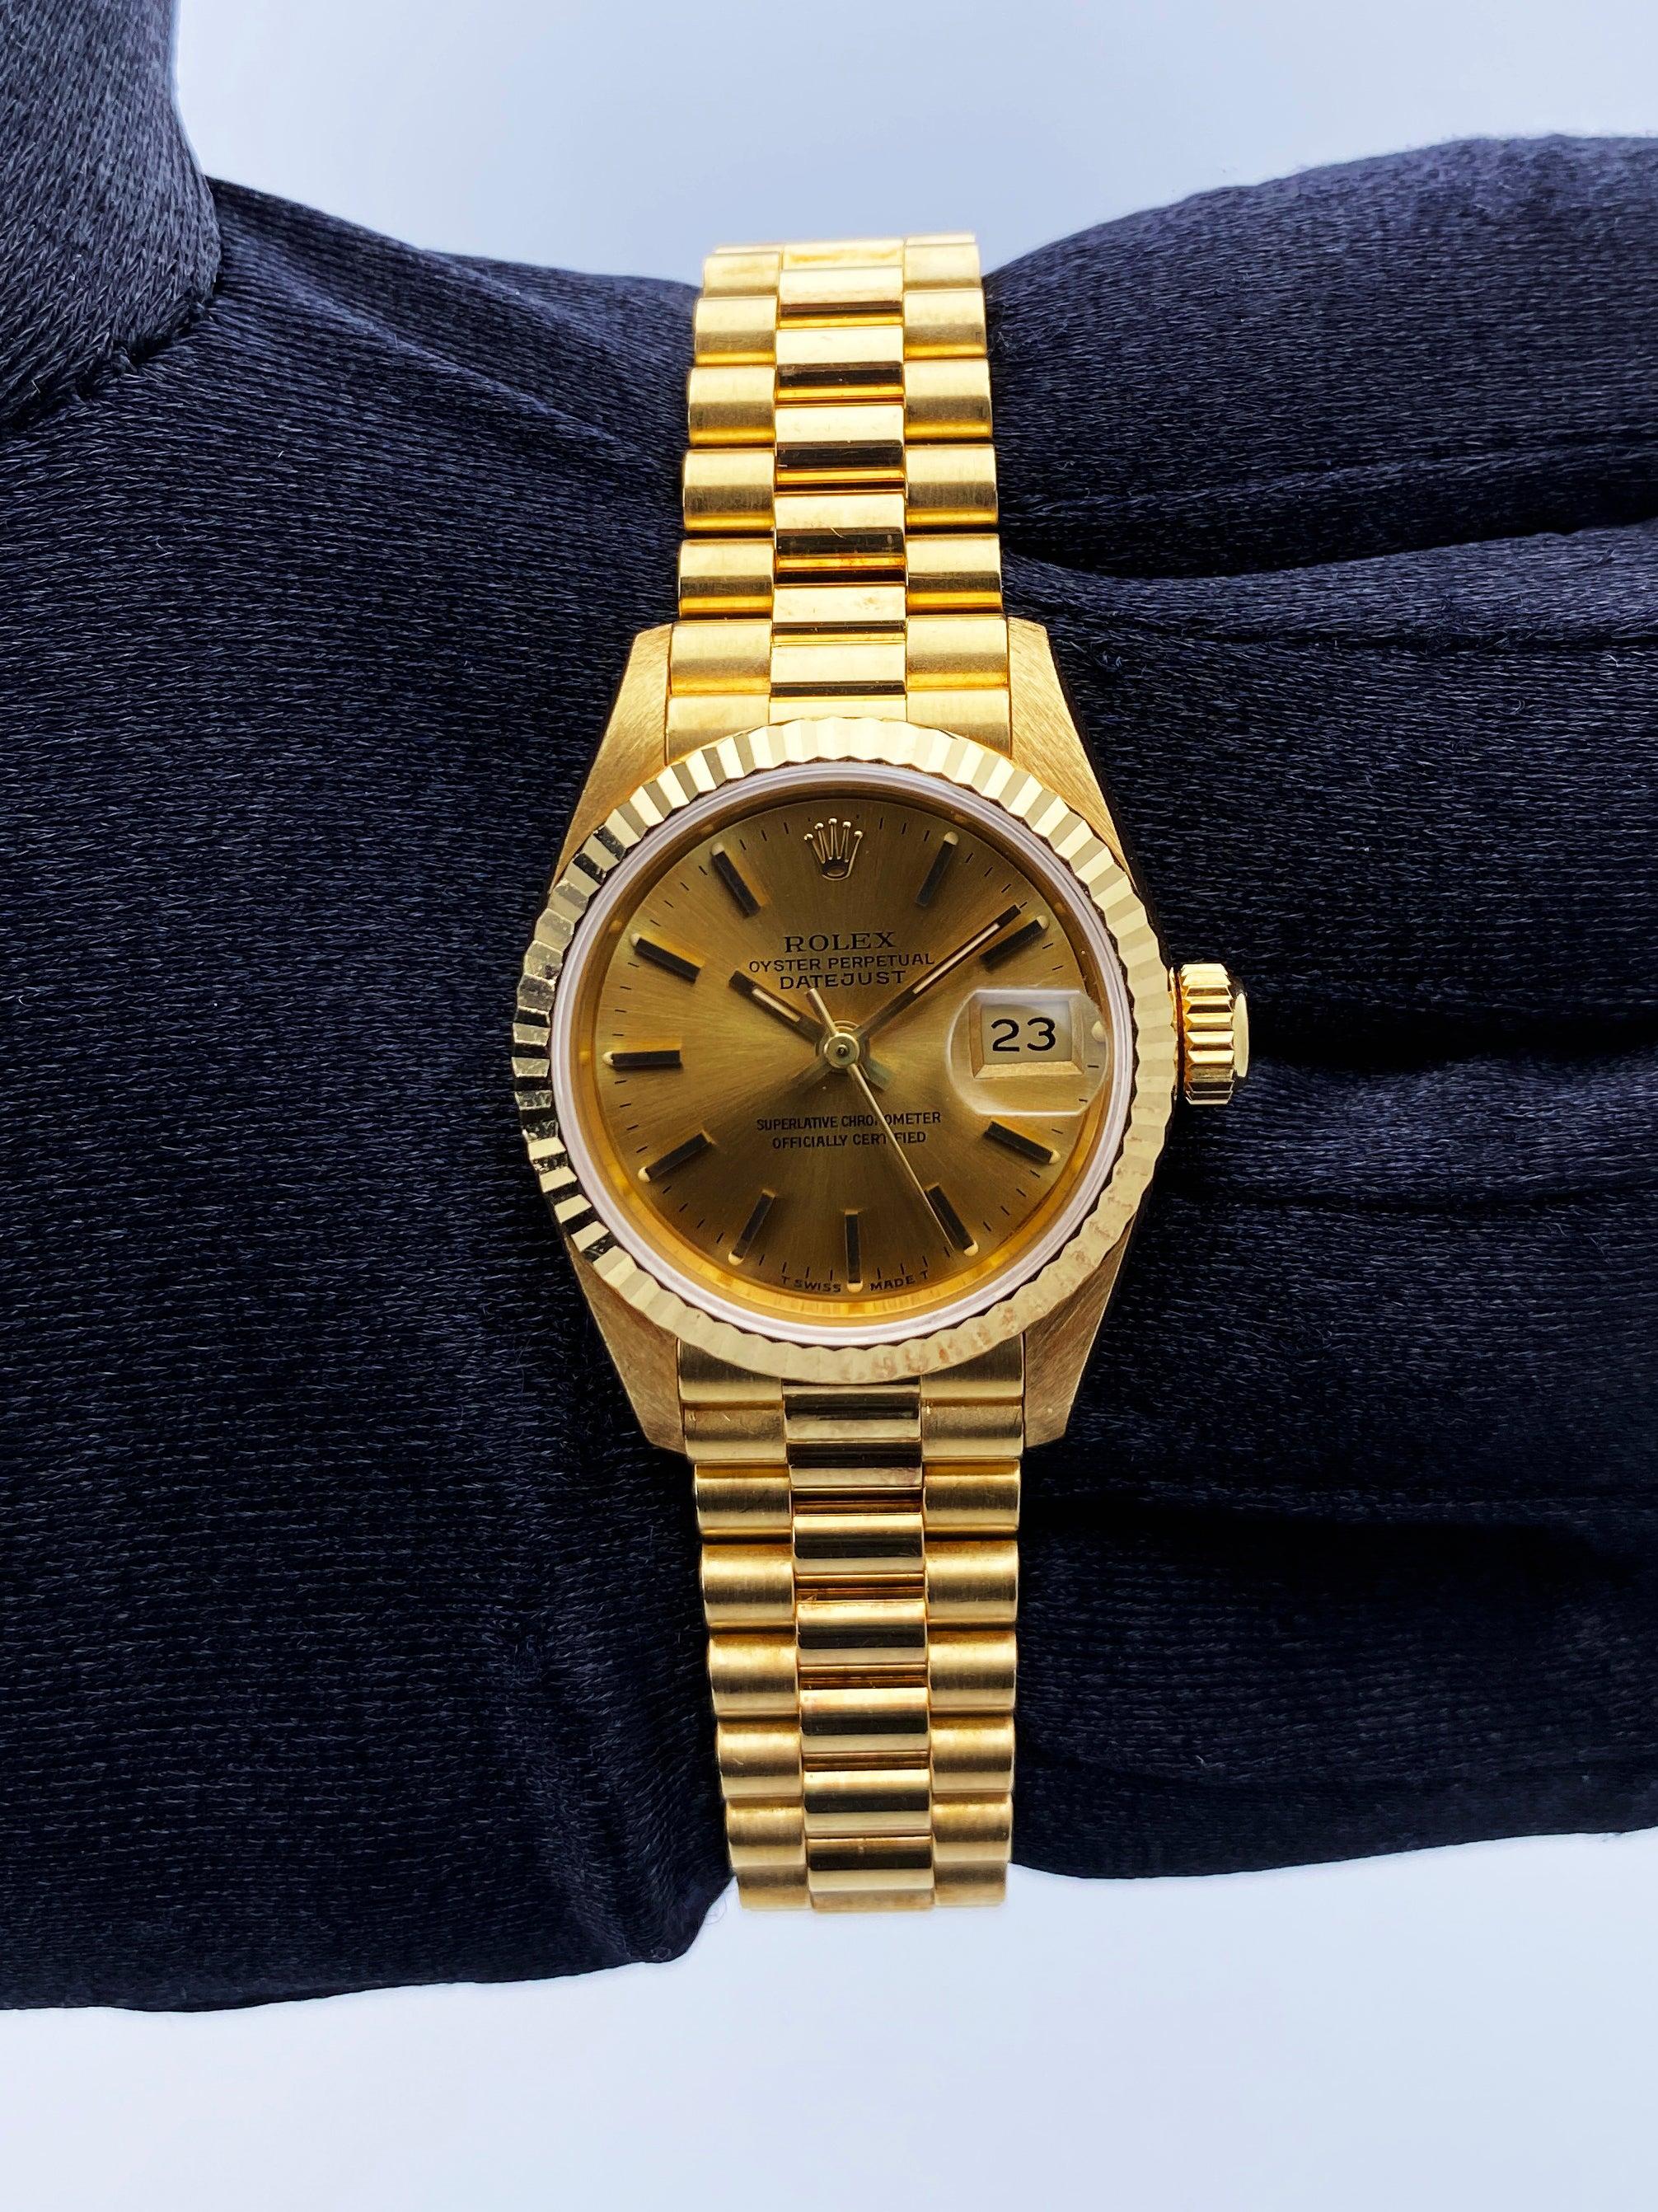 Rolex Oyster Perpetual Datejust 69178 Ladies Watch. 26mm 18K yellow gold case with a fluted bezel. Champagne dial with gold hands and index hour markers. Minute markers on the outer dial. Date display at the 3 o'clock position. 18K yellow gold